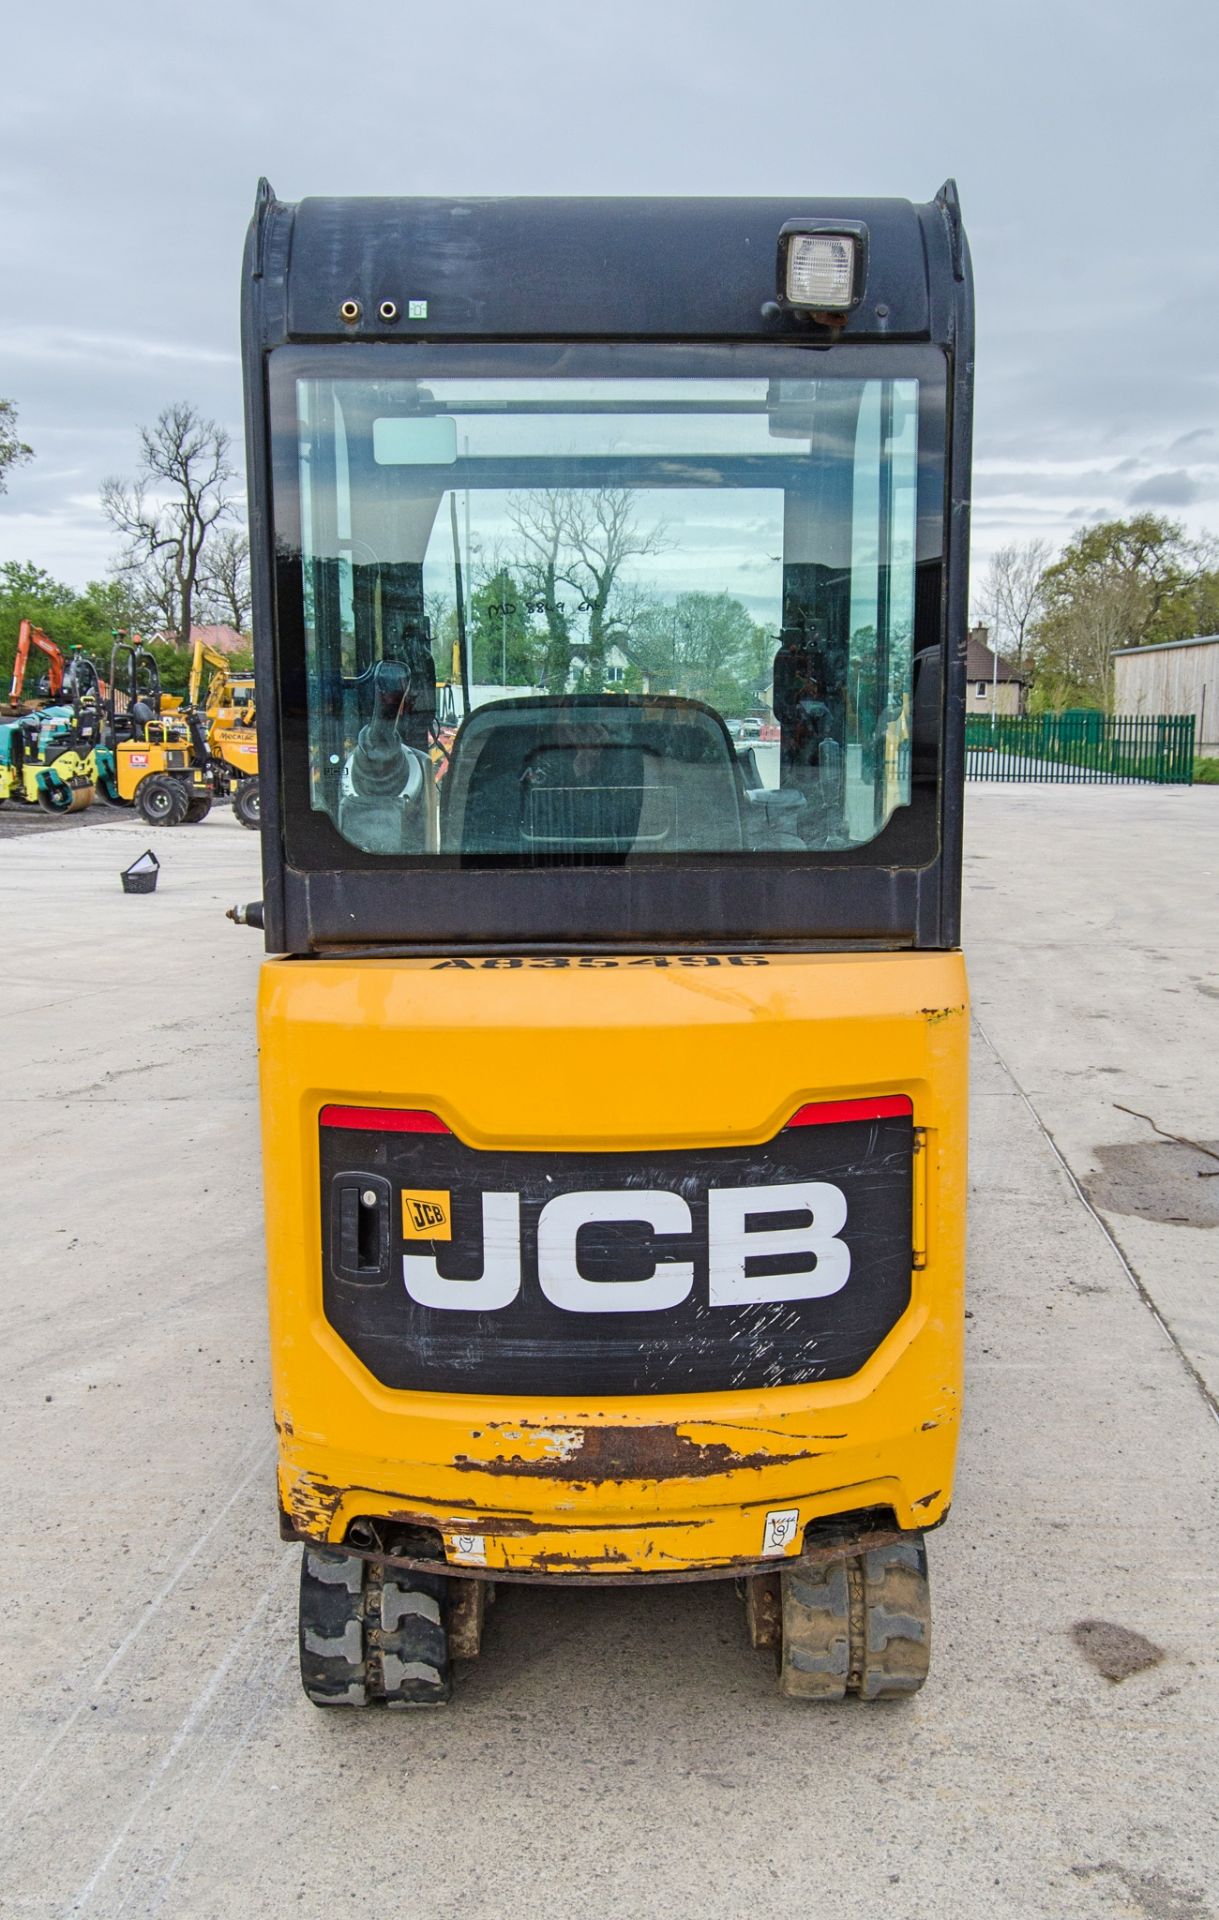 JCB 19 C-1 1.9 tonne rubber tracked mini excavator Year: 2017 S/N: 2494021 Recorded Hours: 1063 - Image 6 of 26